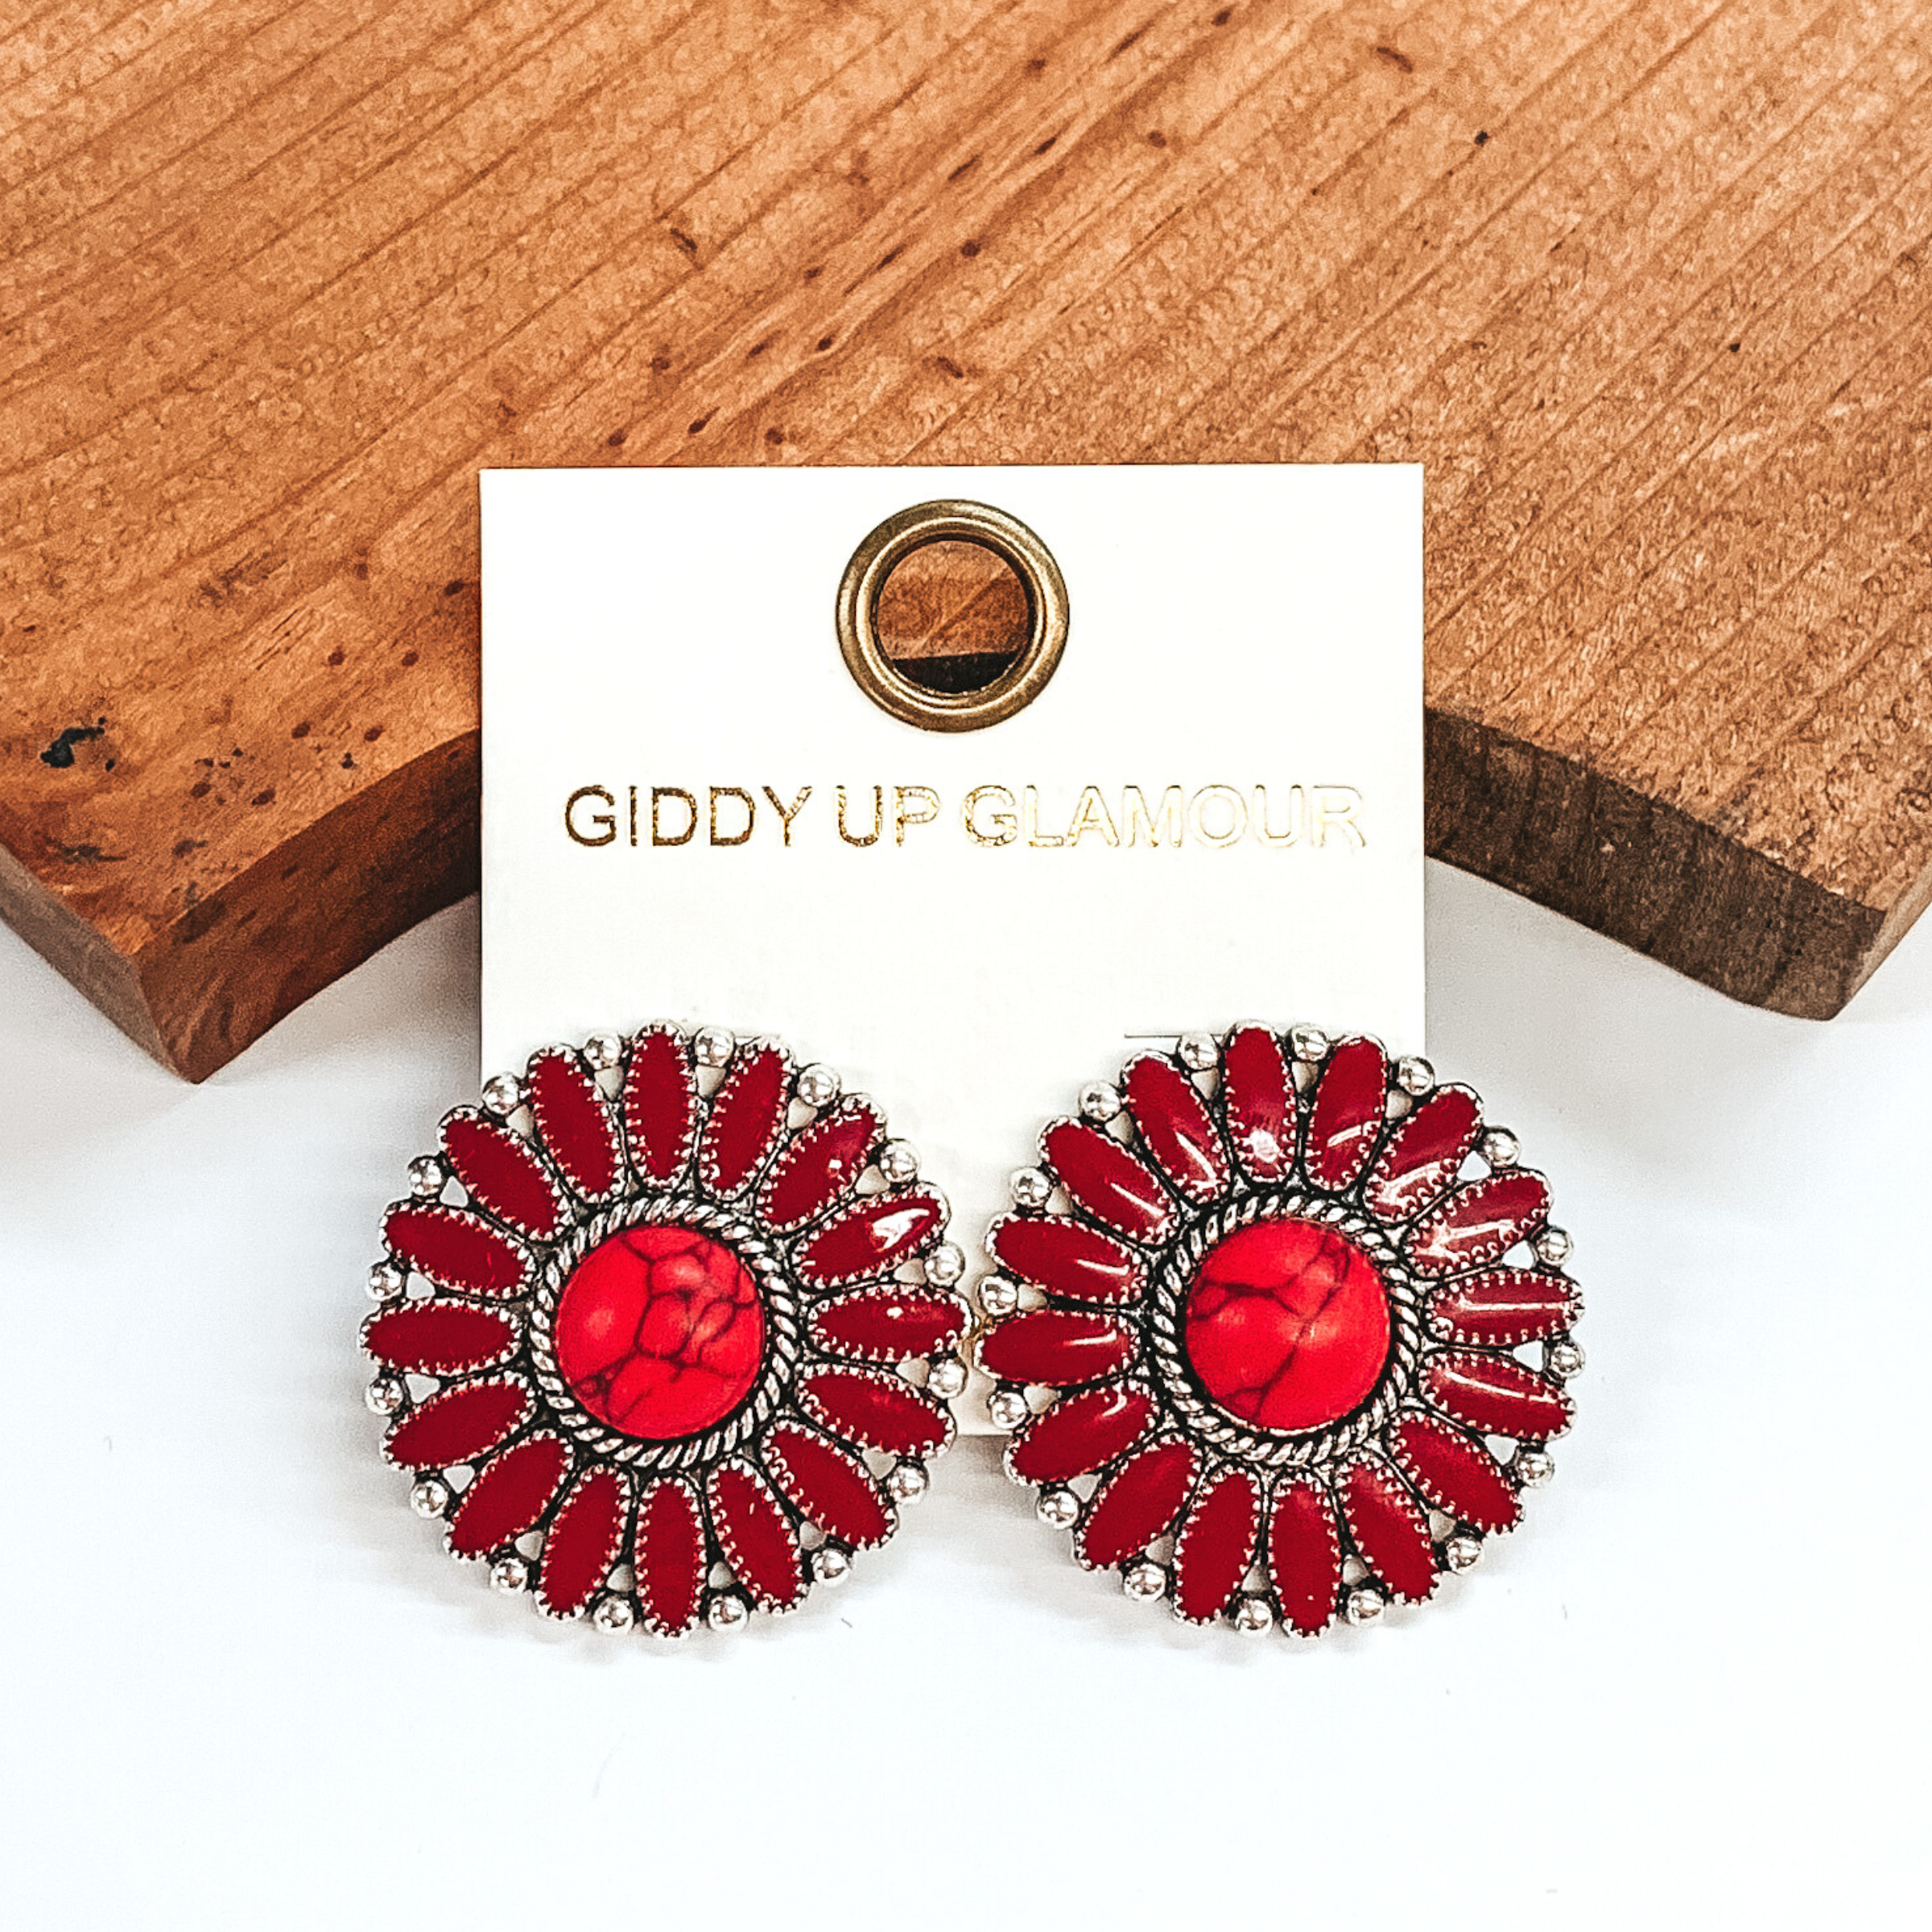 Maroon concho earrings with a center red stone and silver outline. These earrings are pictured on a white earrings holder laying against a dark brown block on a white background.